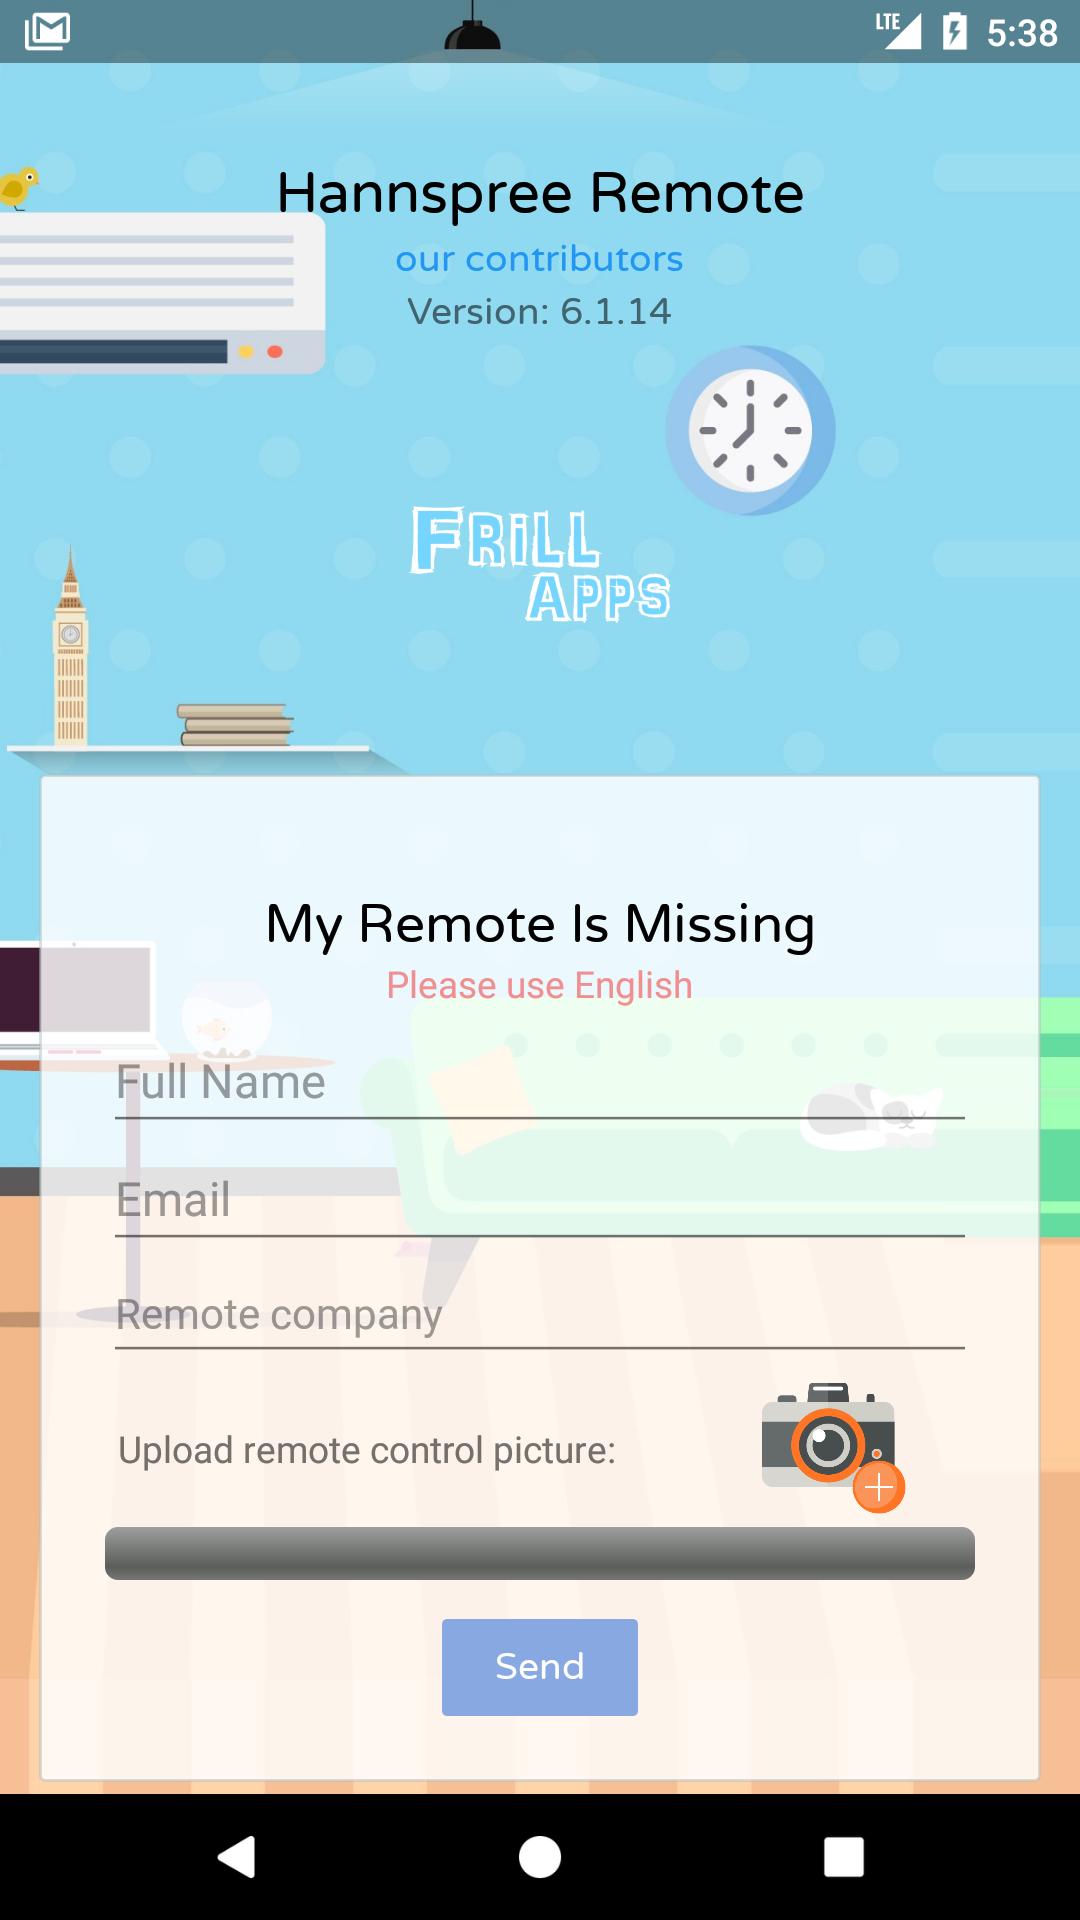 Remote Control For Hannspree TV for Android - APK Download